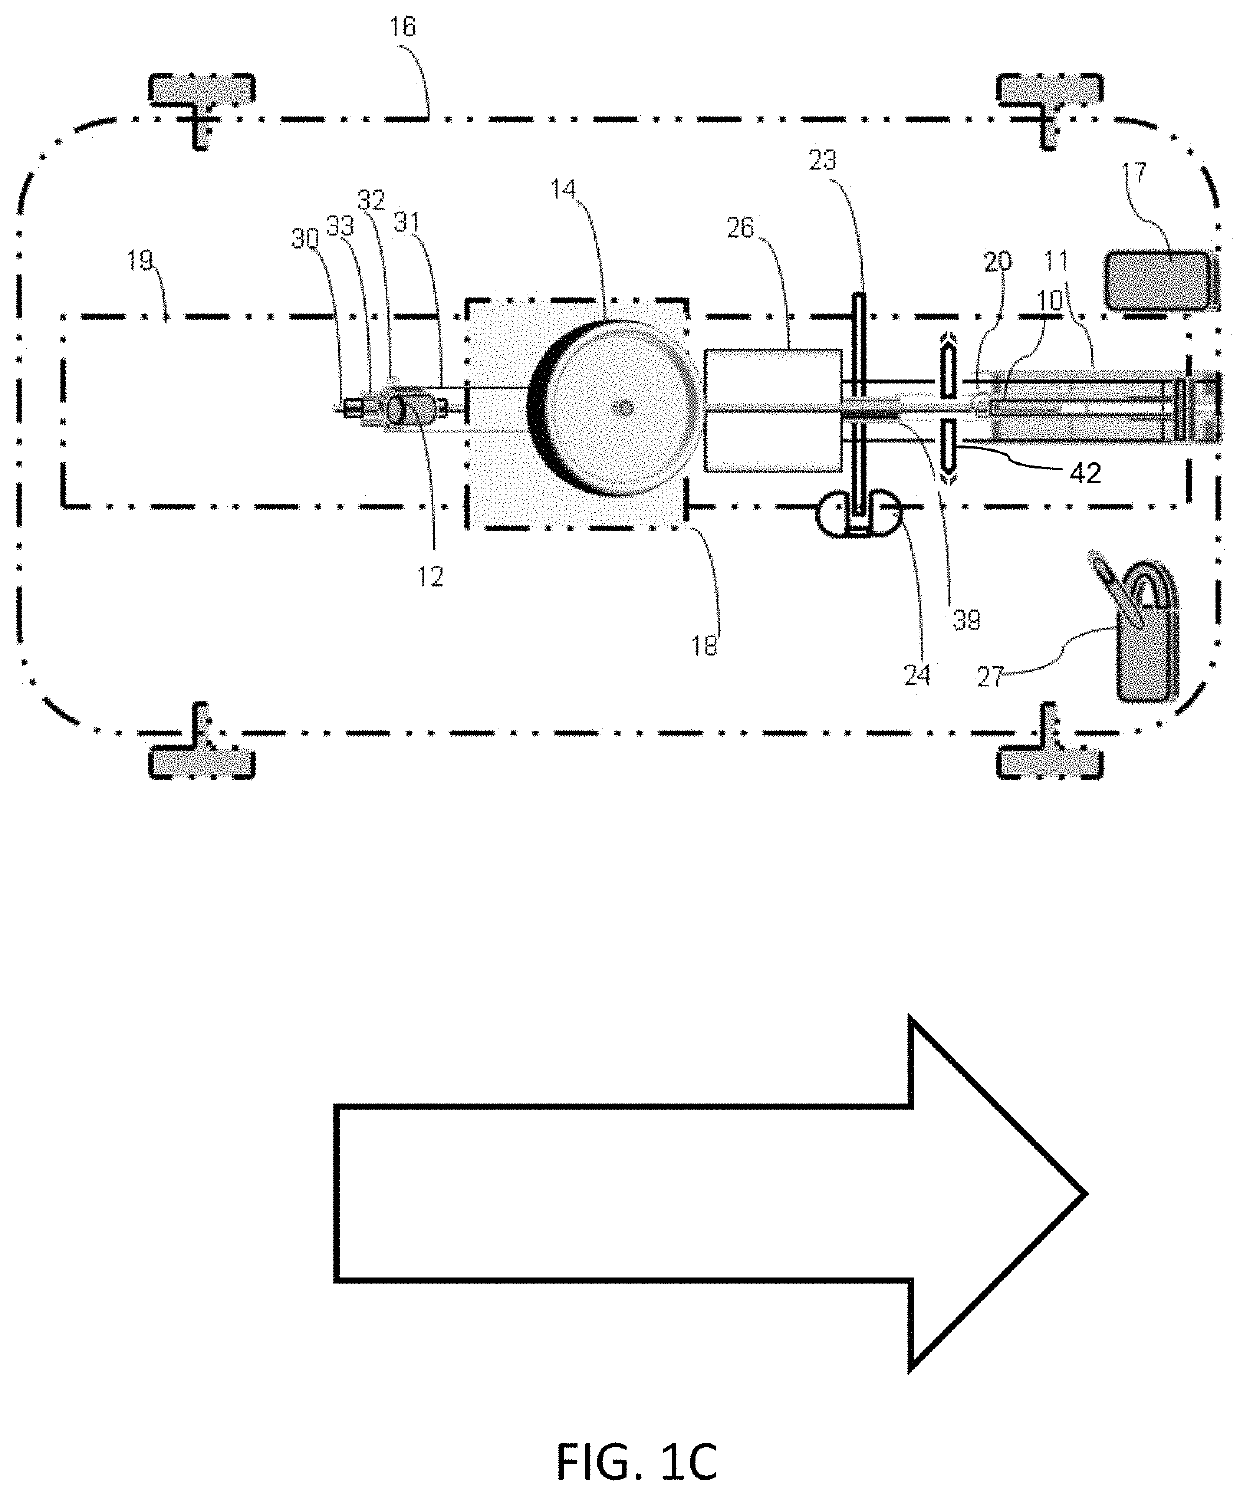 Multiple torques inertial thruster engine and methodology